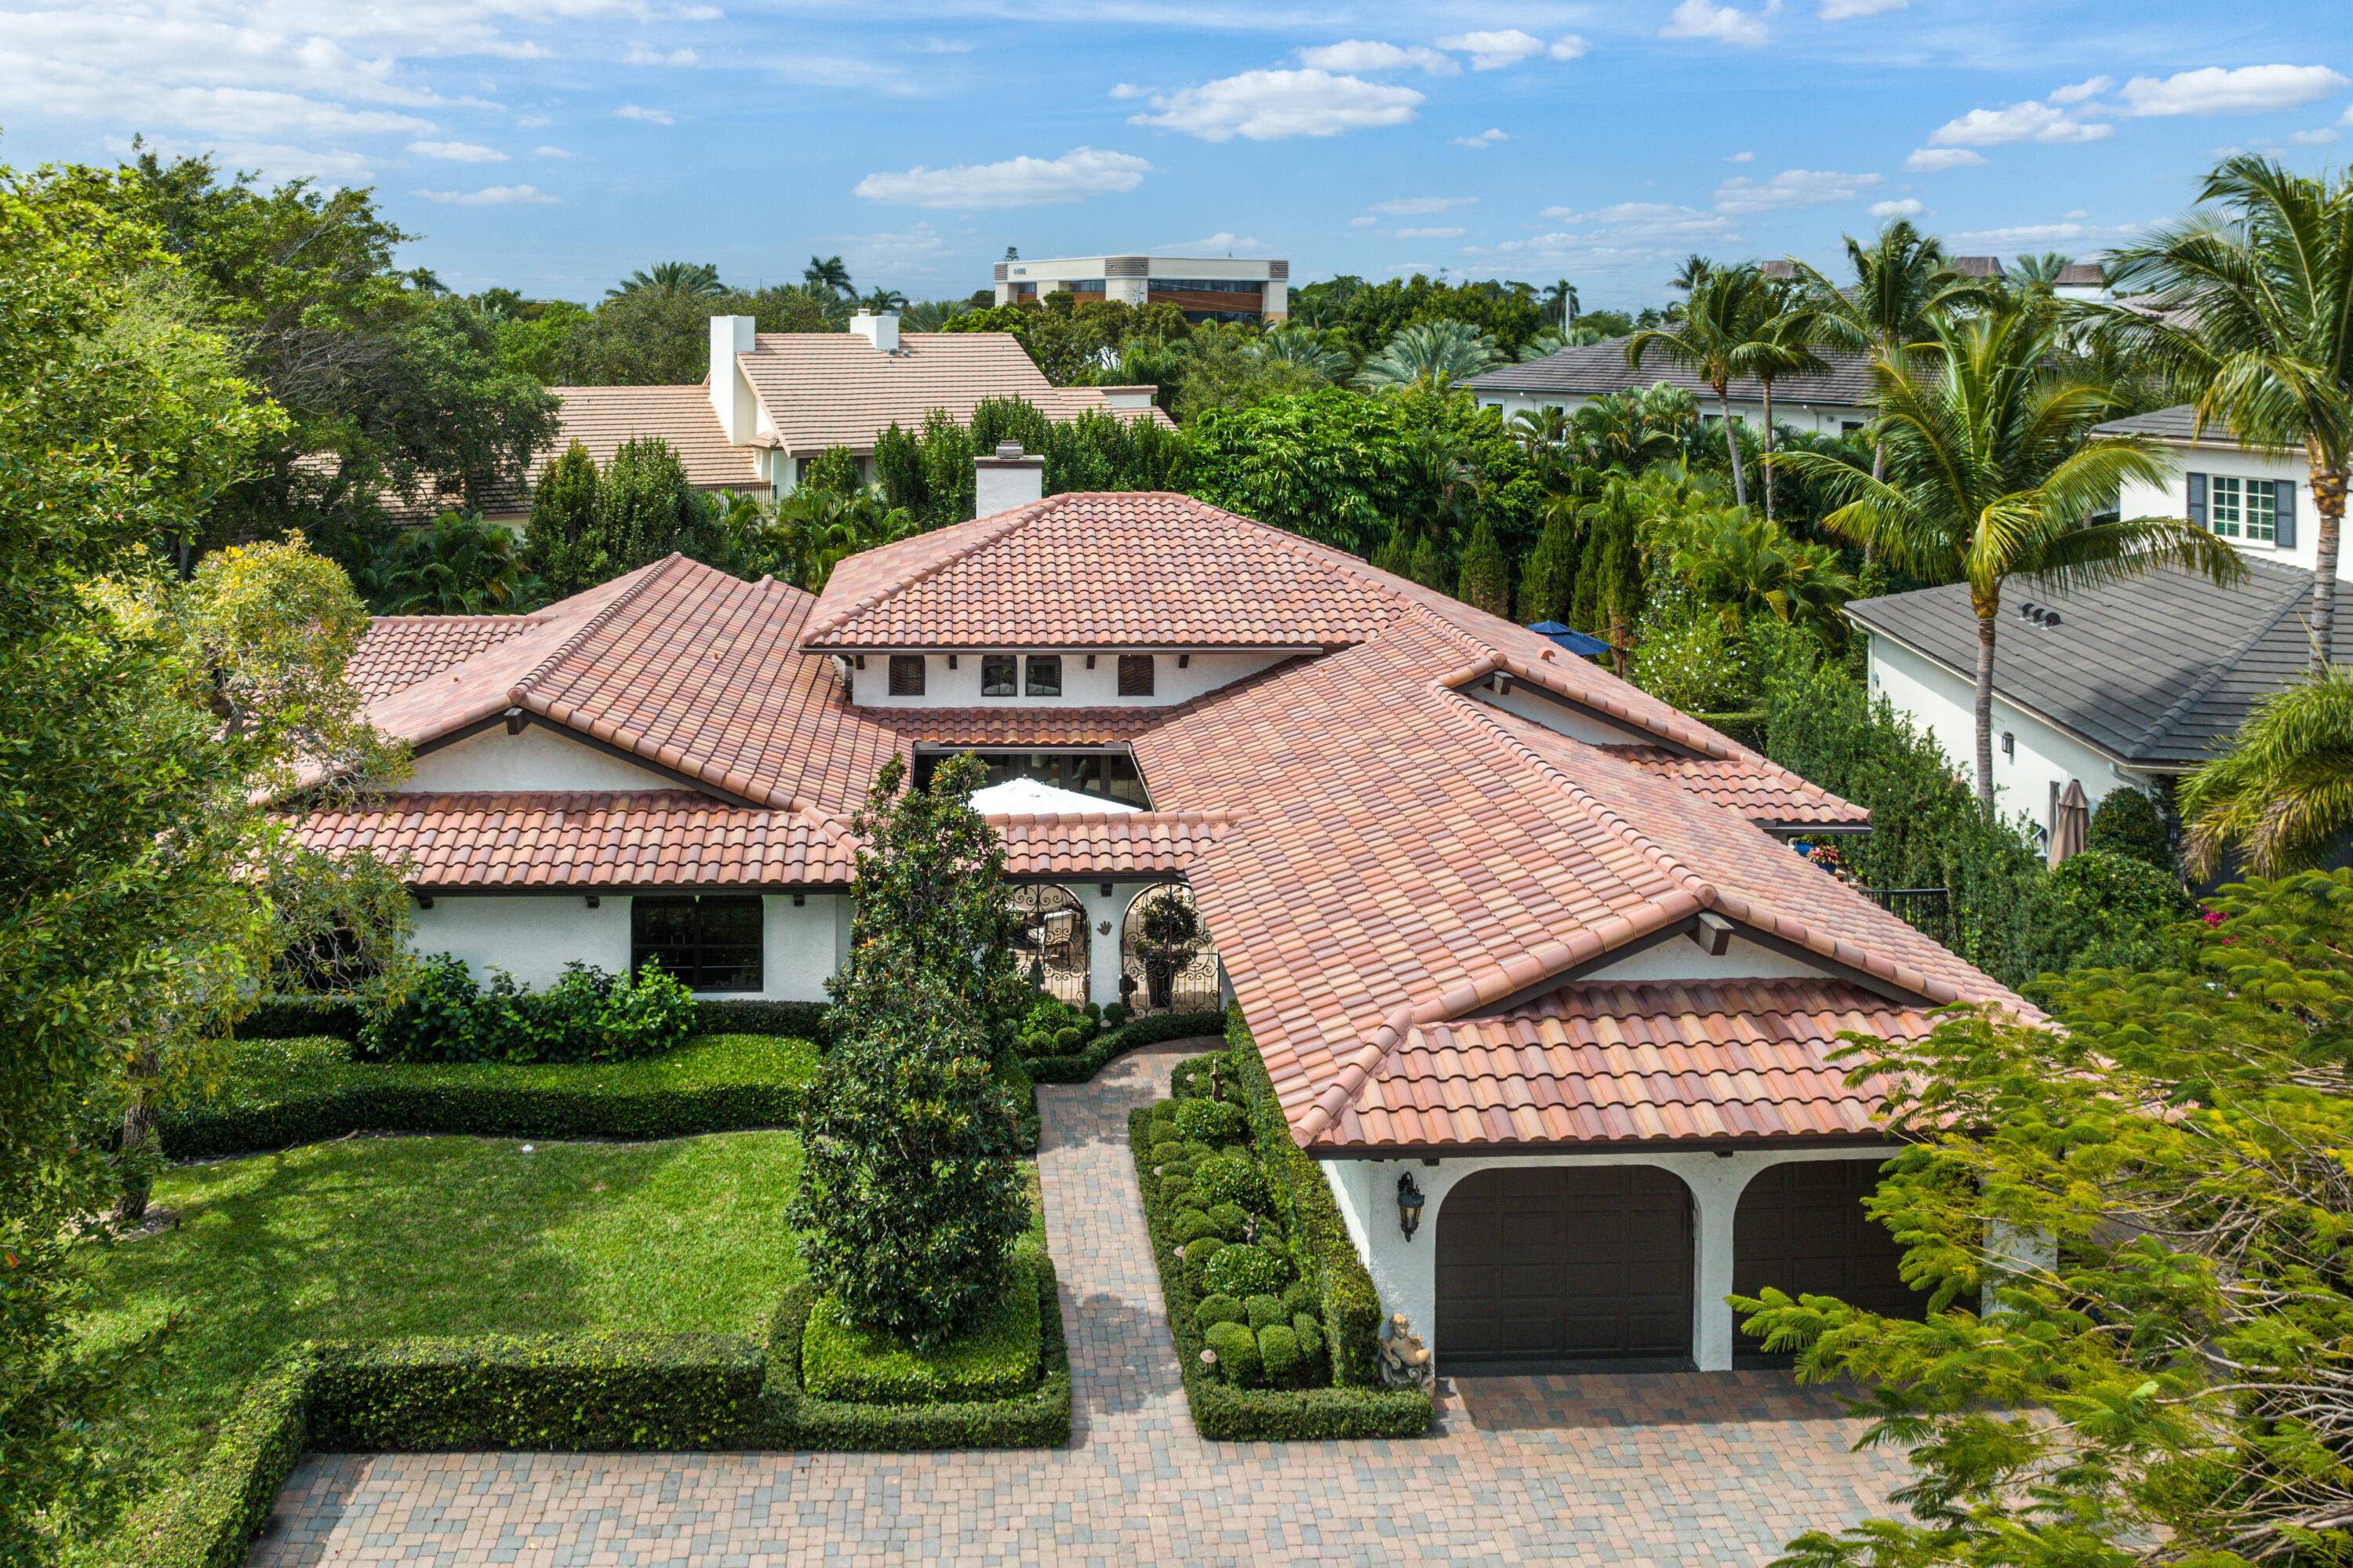 Located within The Sanctuary, one of Boca Raton's most sought after communities, the 4, 300 sq.